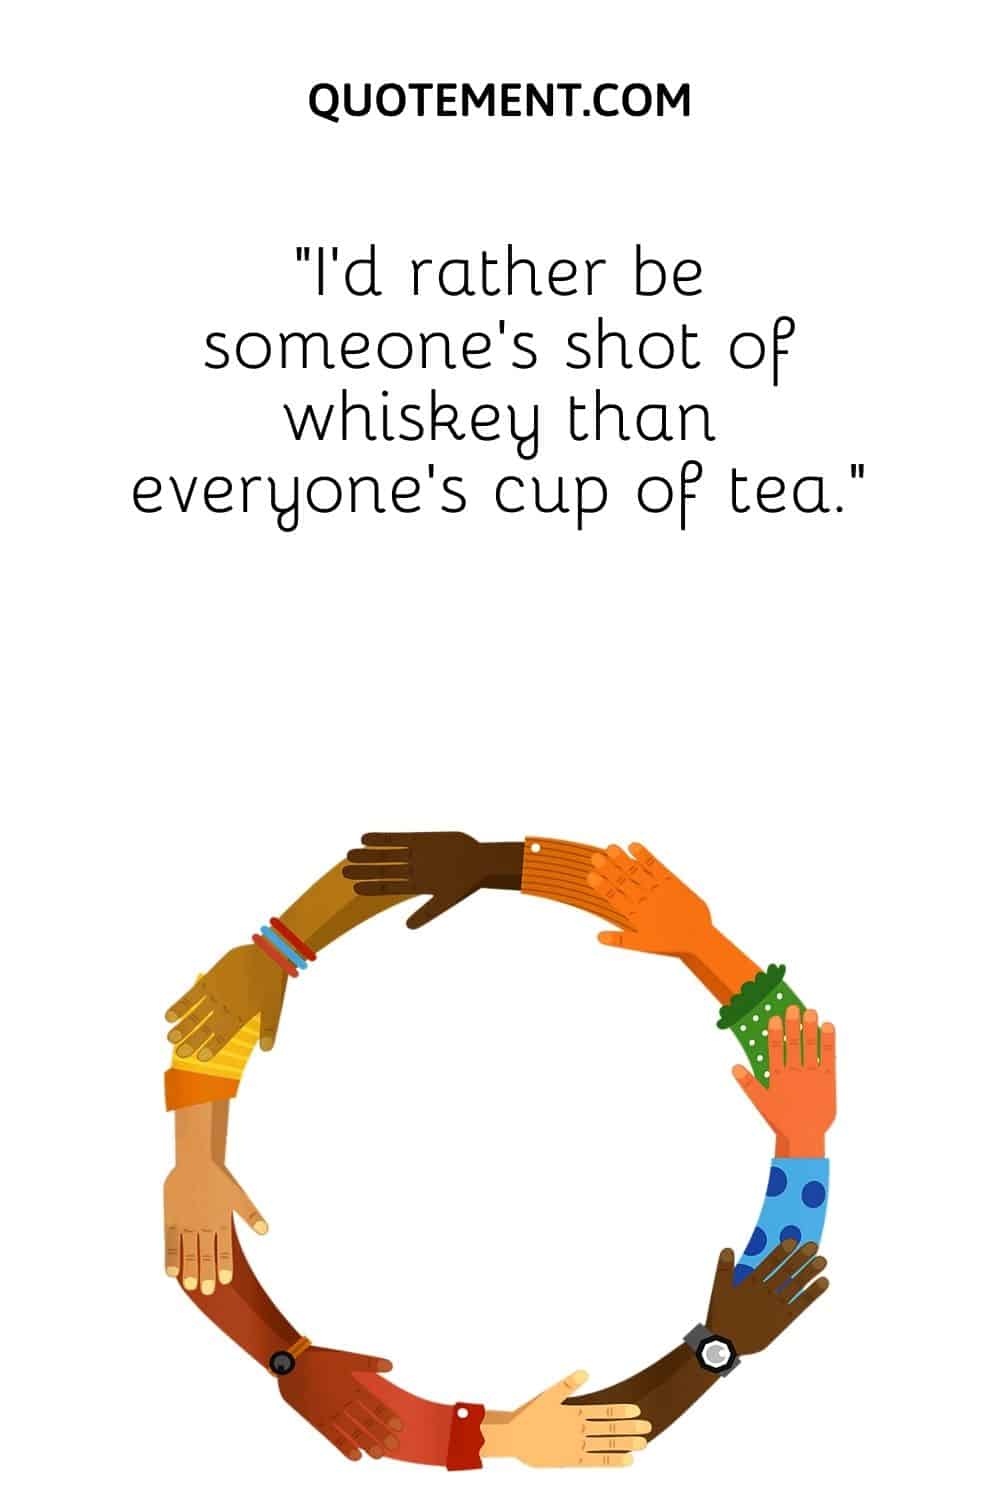 “I’d rather be someone’s shot of whiskey than everyone’s cup of tea.”